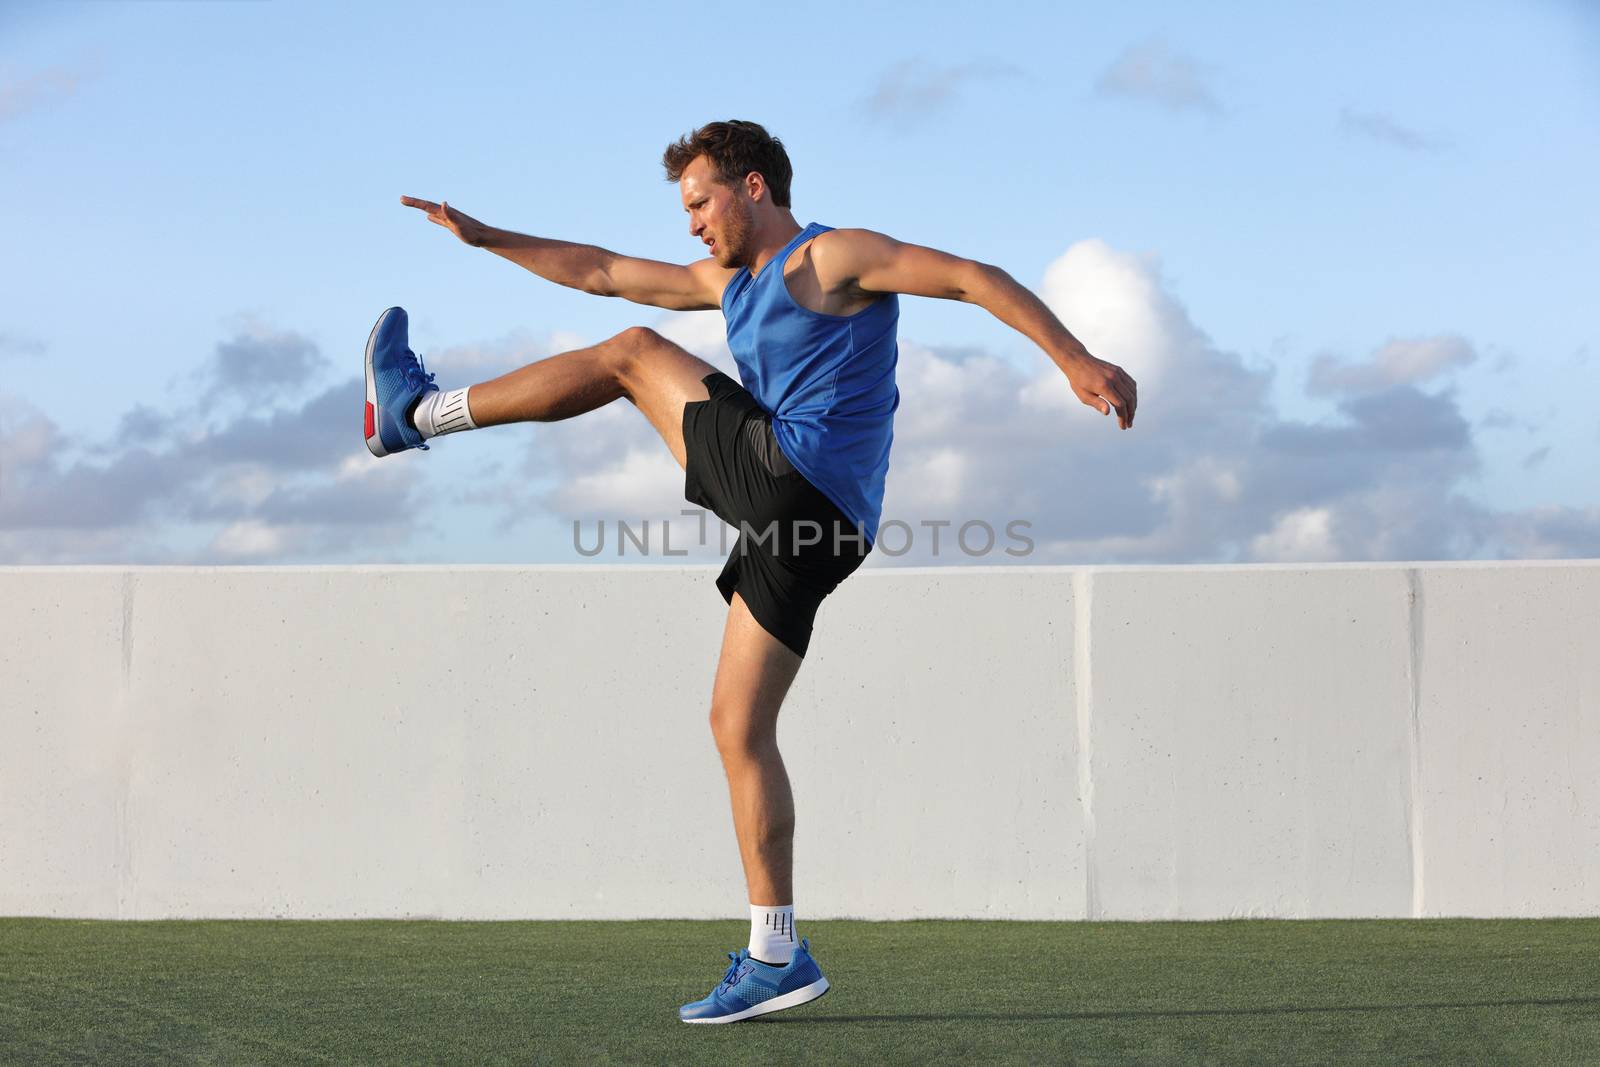 Runner man getting ready to run doing warm-up dynamic leg stretch exercises routine, Male athlete stretching lower body hamstring muscles before going running outside in summer outdoors. by Maridav